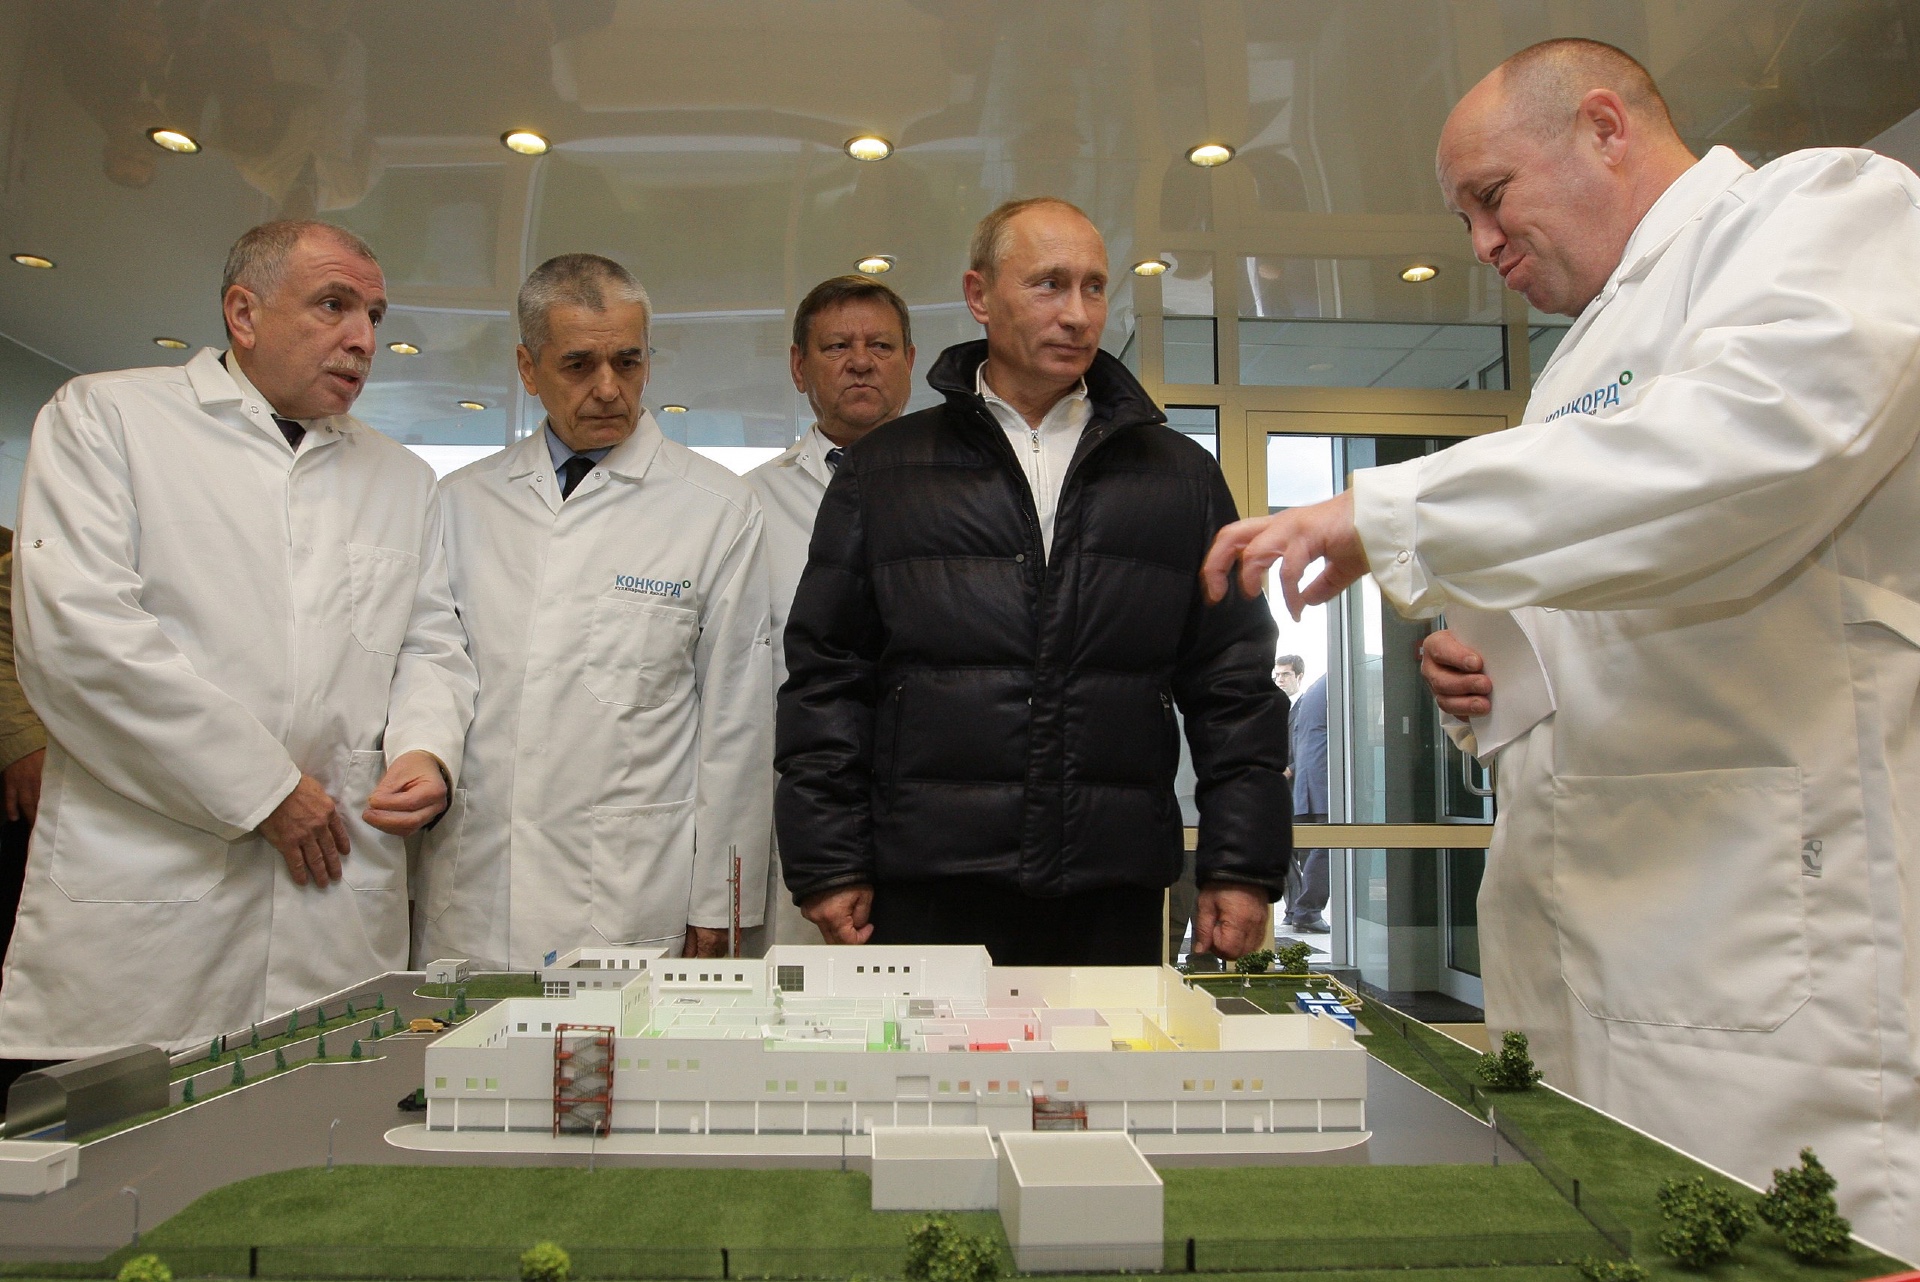 Prime Minister Vladimir Putin tours the new factory Concord, which supplies pre-prepared meals to schools